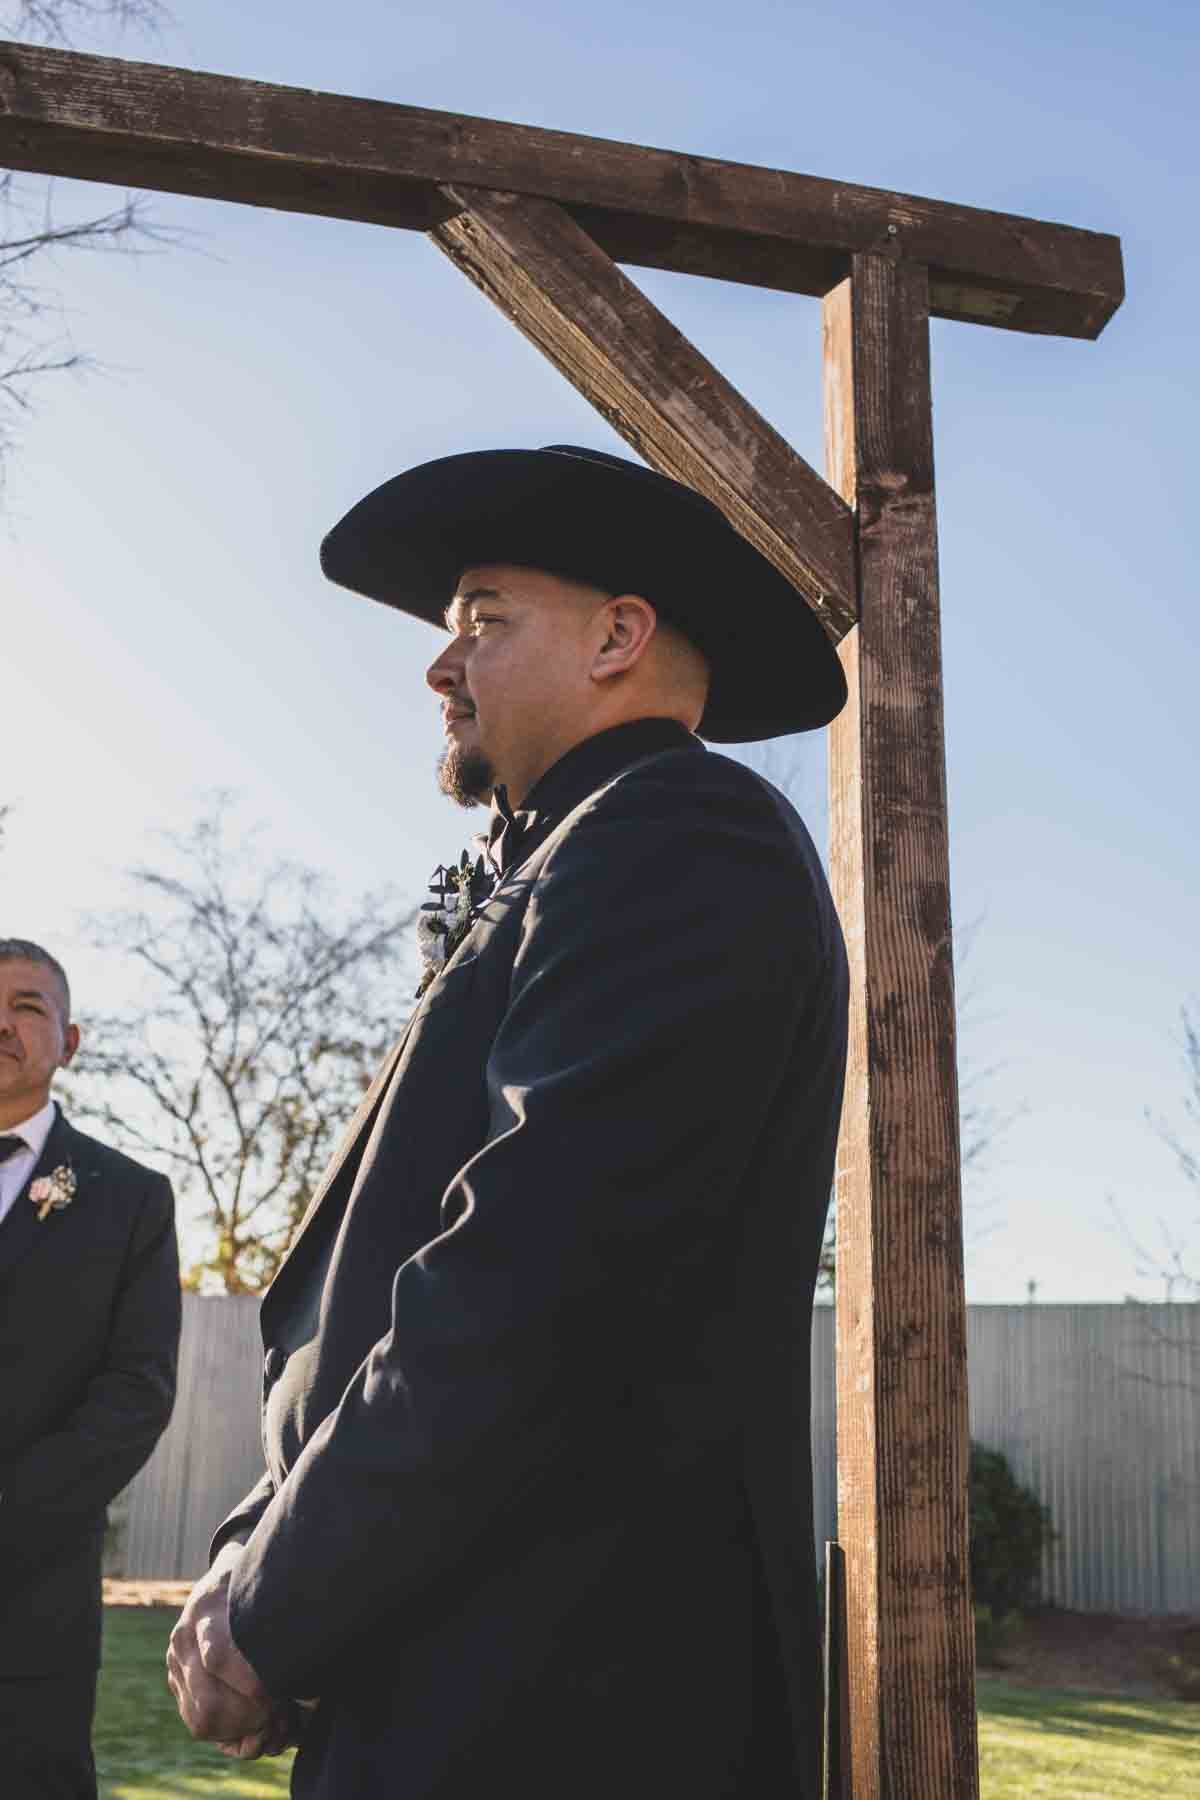  Groom reads his vows at Mexican Cowboy / Vaquero Farm Wedding at the Big Red Barn wedding at Schnepf Farms in Queen Creek, Arizona by Arizona based Photographer, Jennifer Lind Schutsky. 